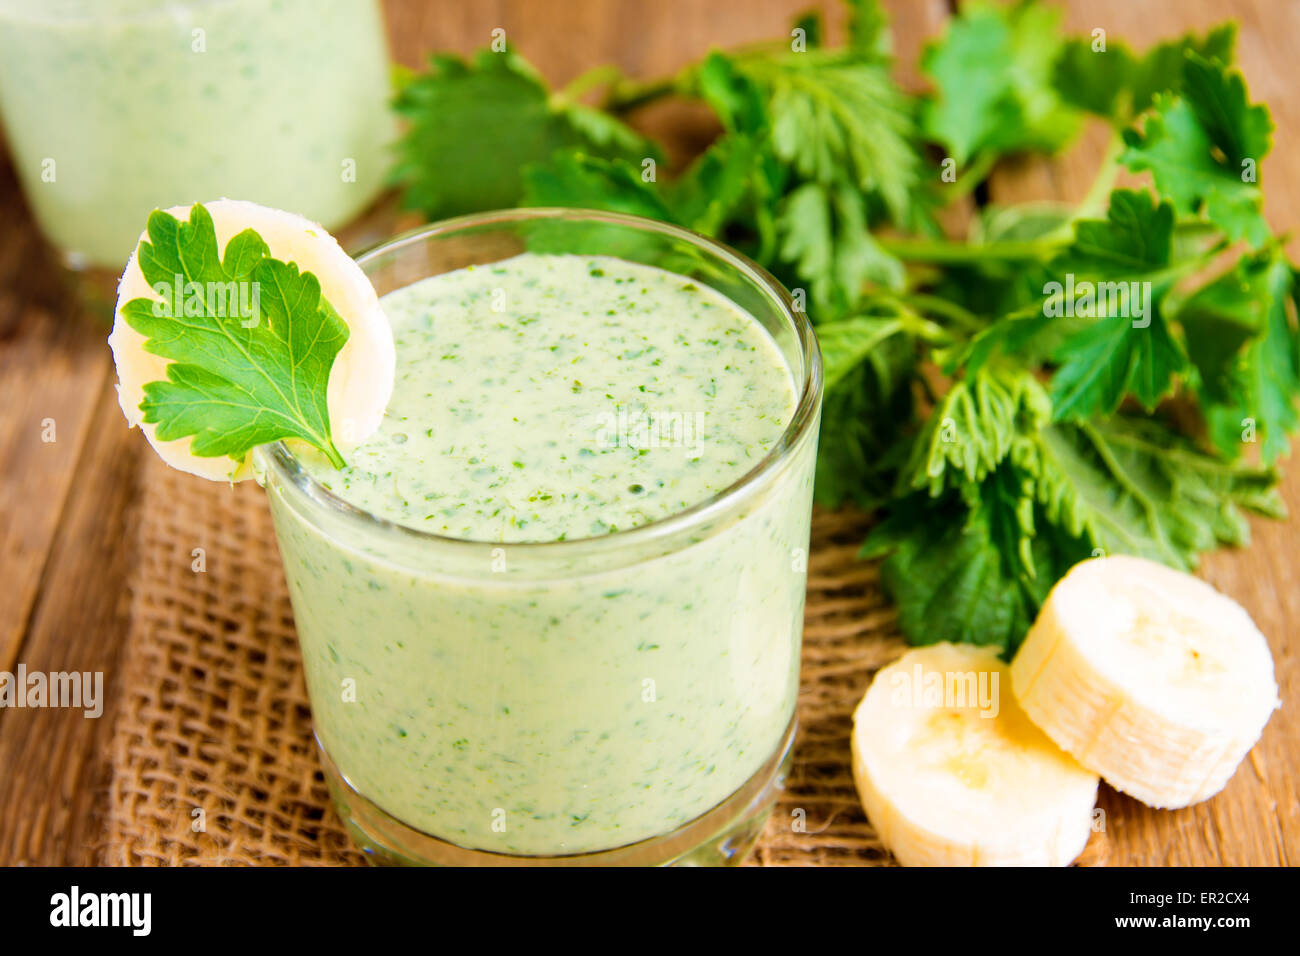 Cold smoothie from banana, yougurt, herbs and vegetables on wooden table, close up horizontal Stock Photo